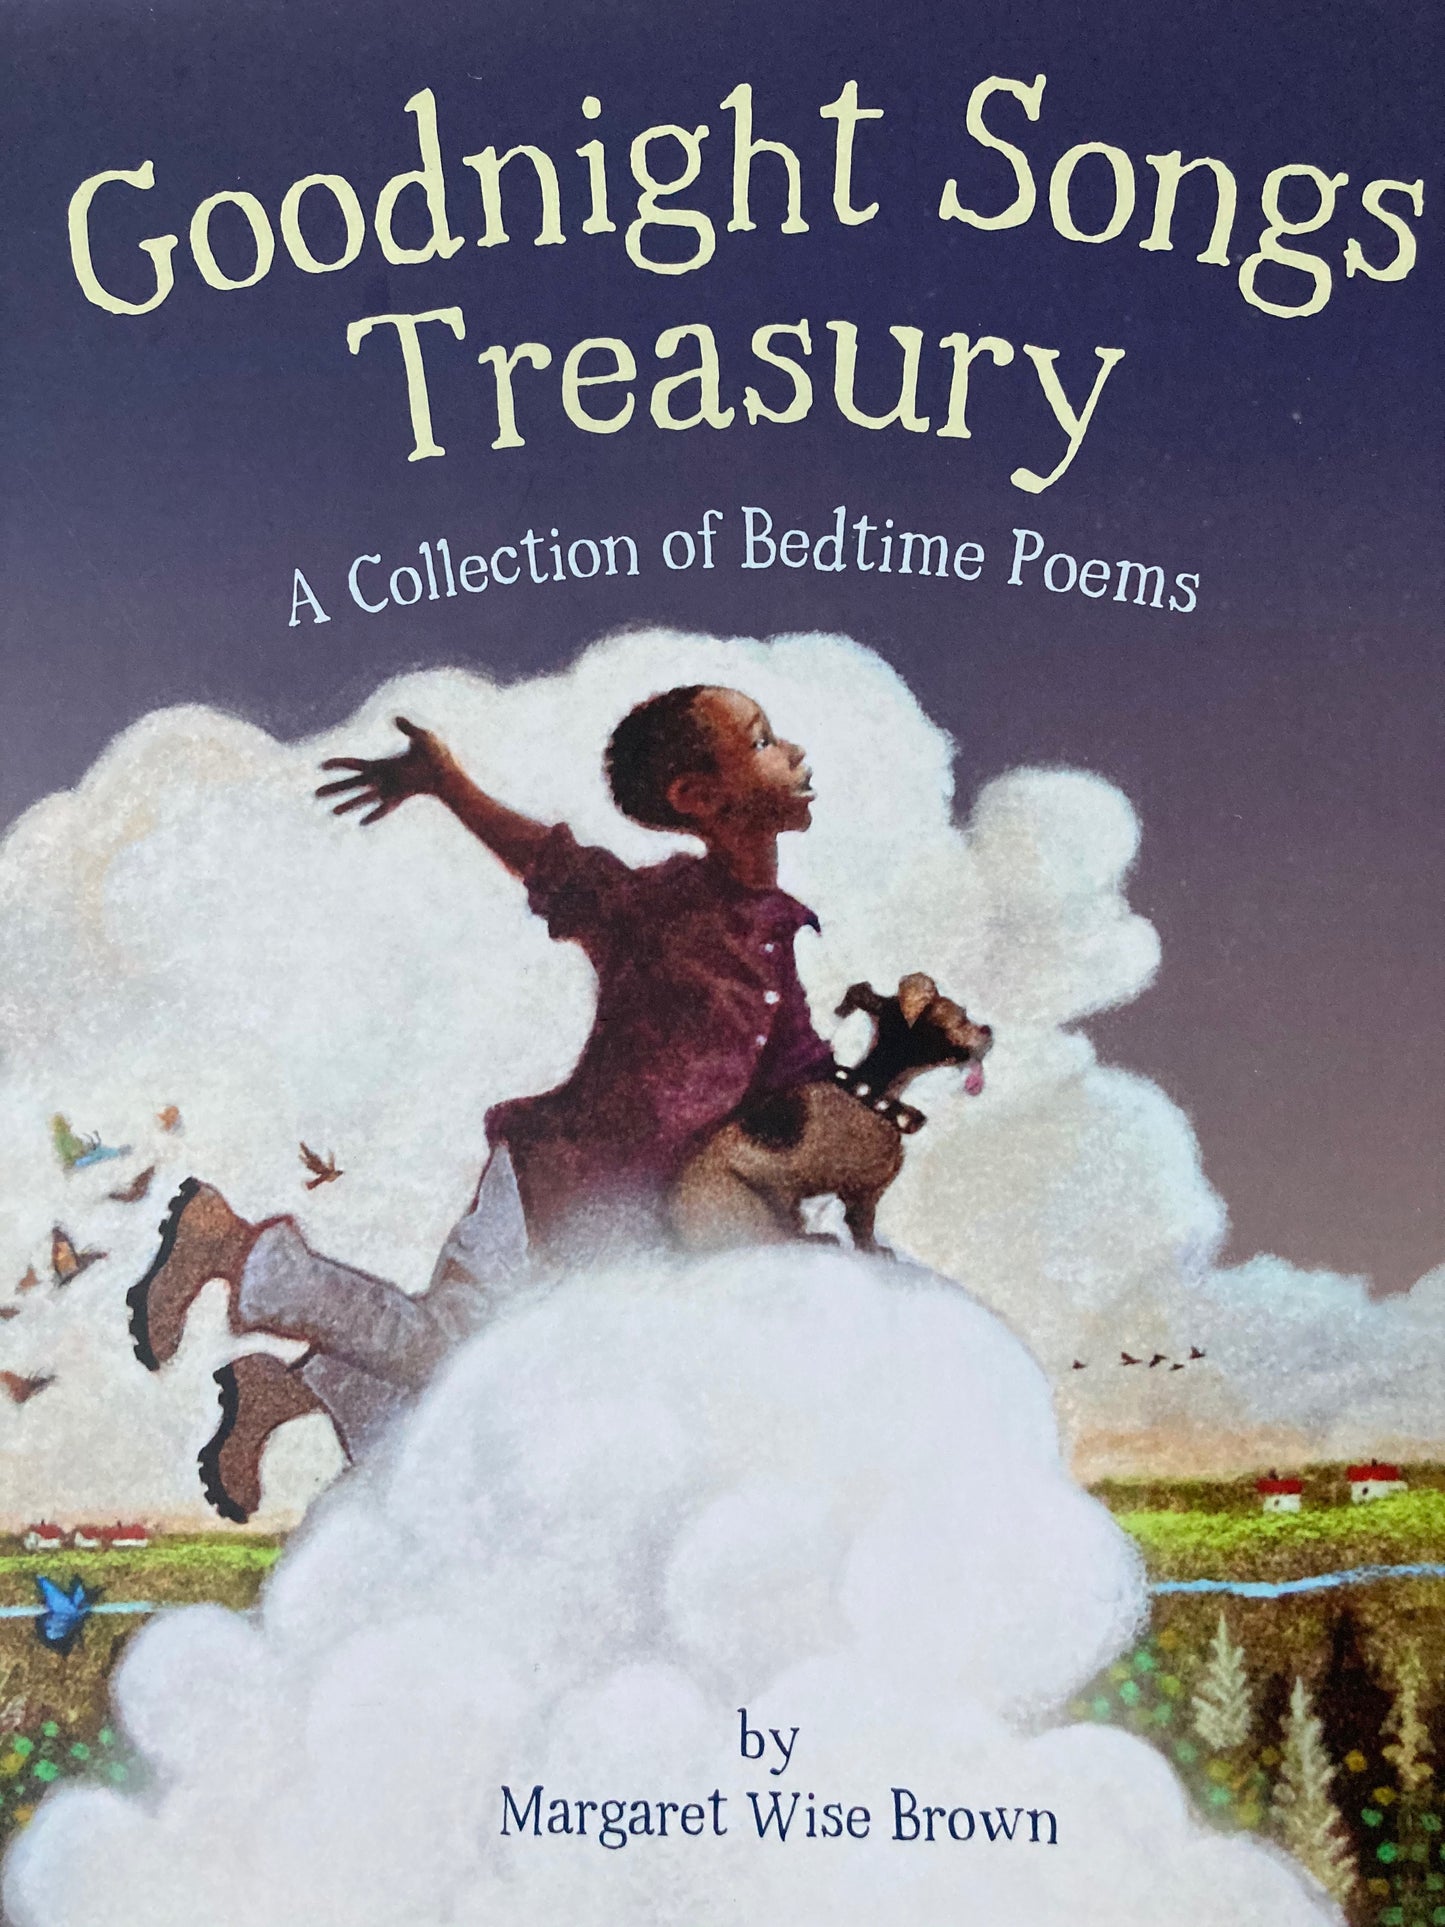 Children's Picture Book of Poems - GOODNIGHT SONGS TREASURY